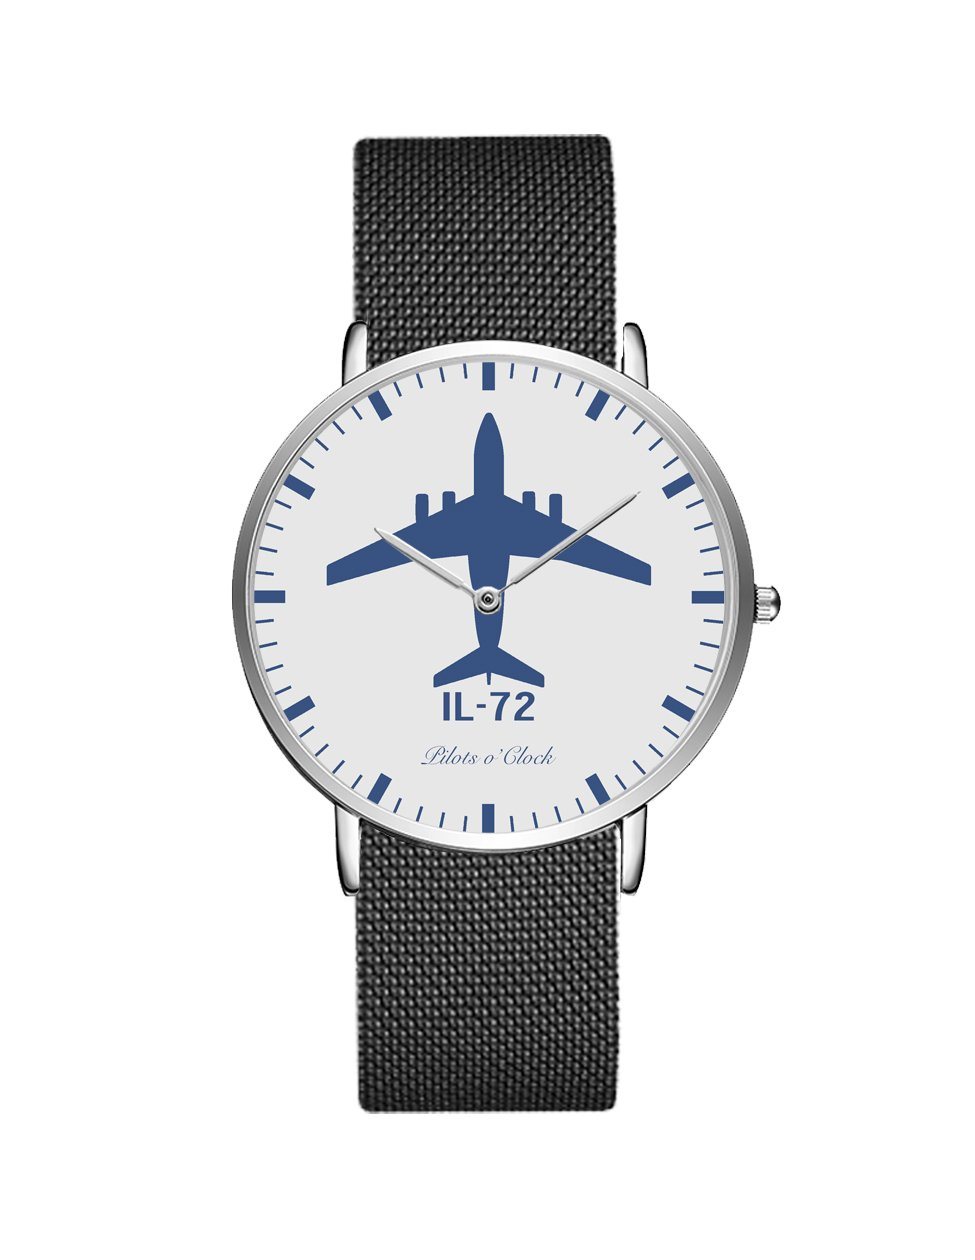 Airbus A300 Stainless Steel Strap Watches Pilot Eyes Store Silver & Black Stainless Steel Strap 